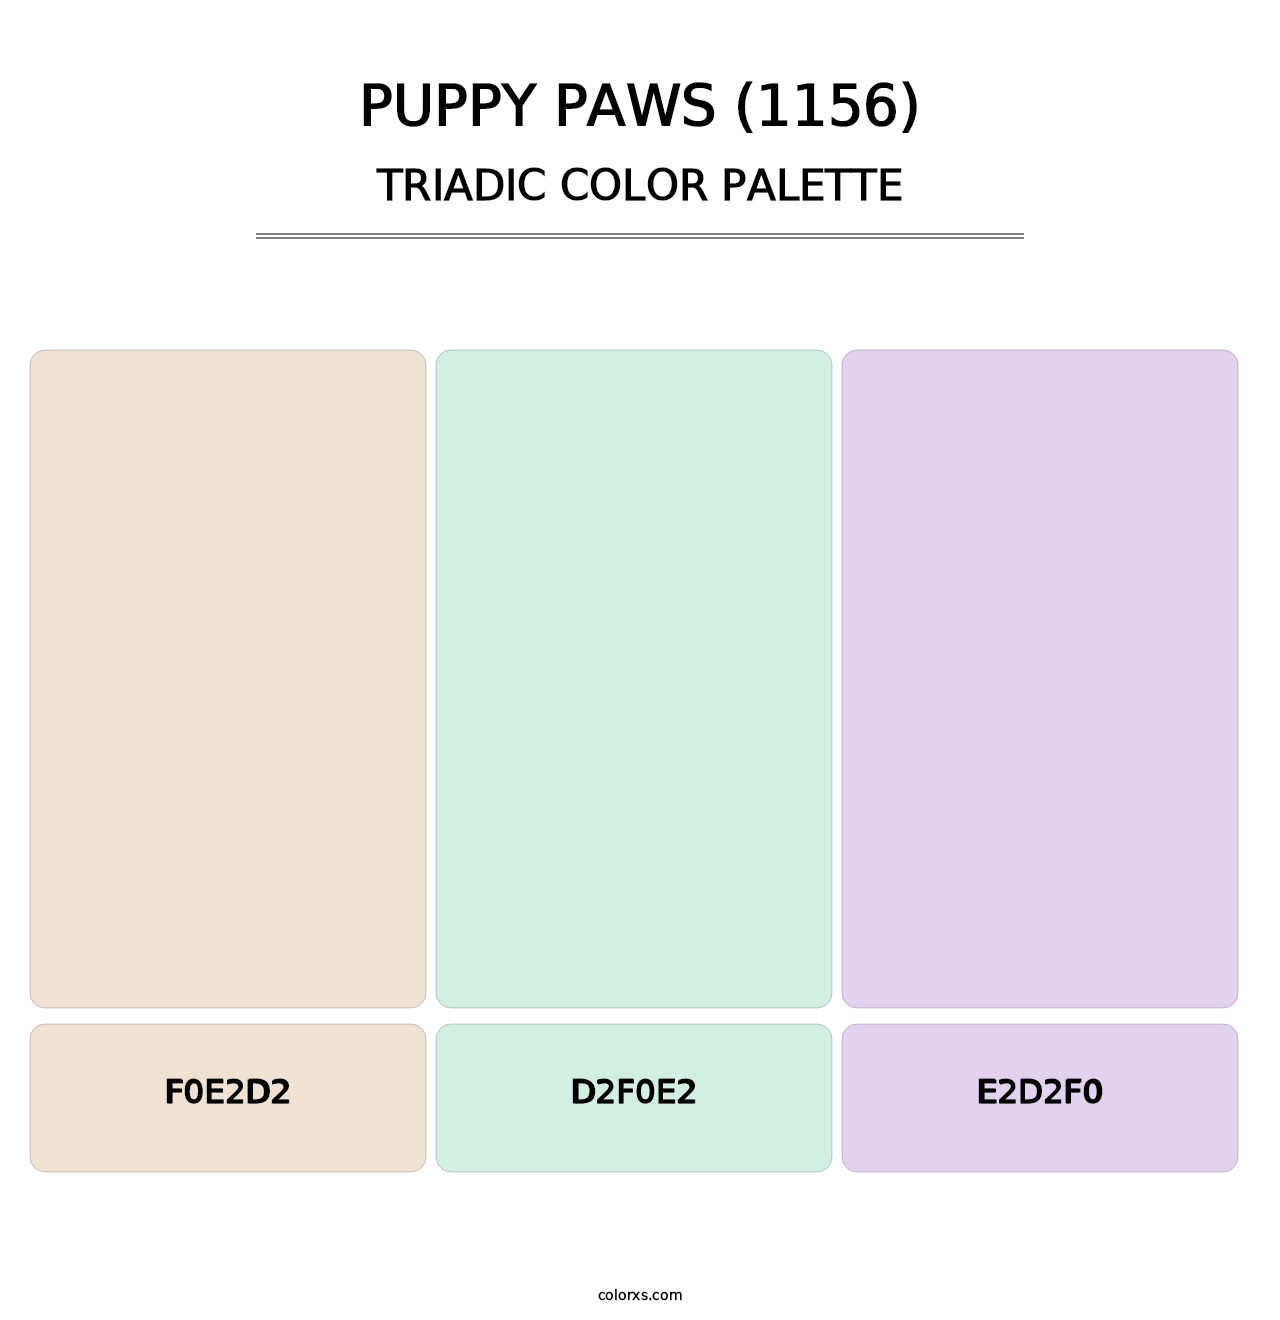 Puppy Paws (1156) - Triadic Color Palette